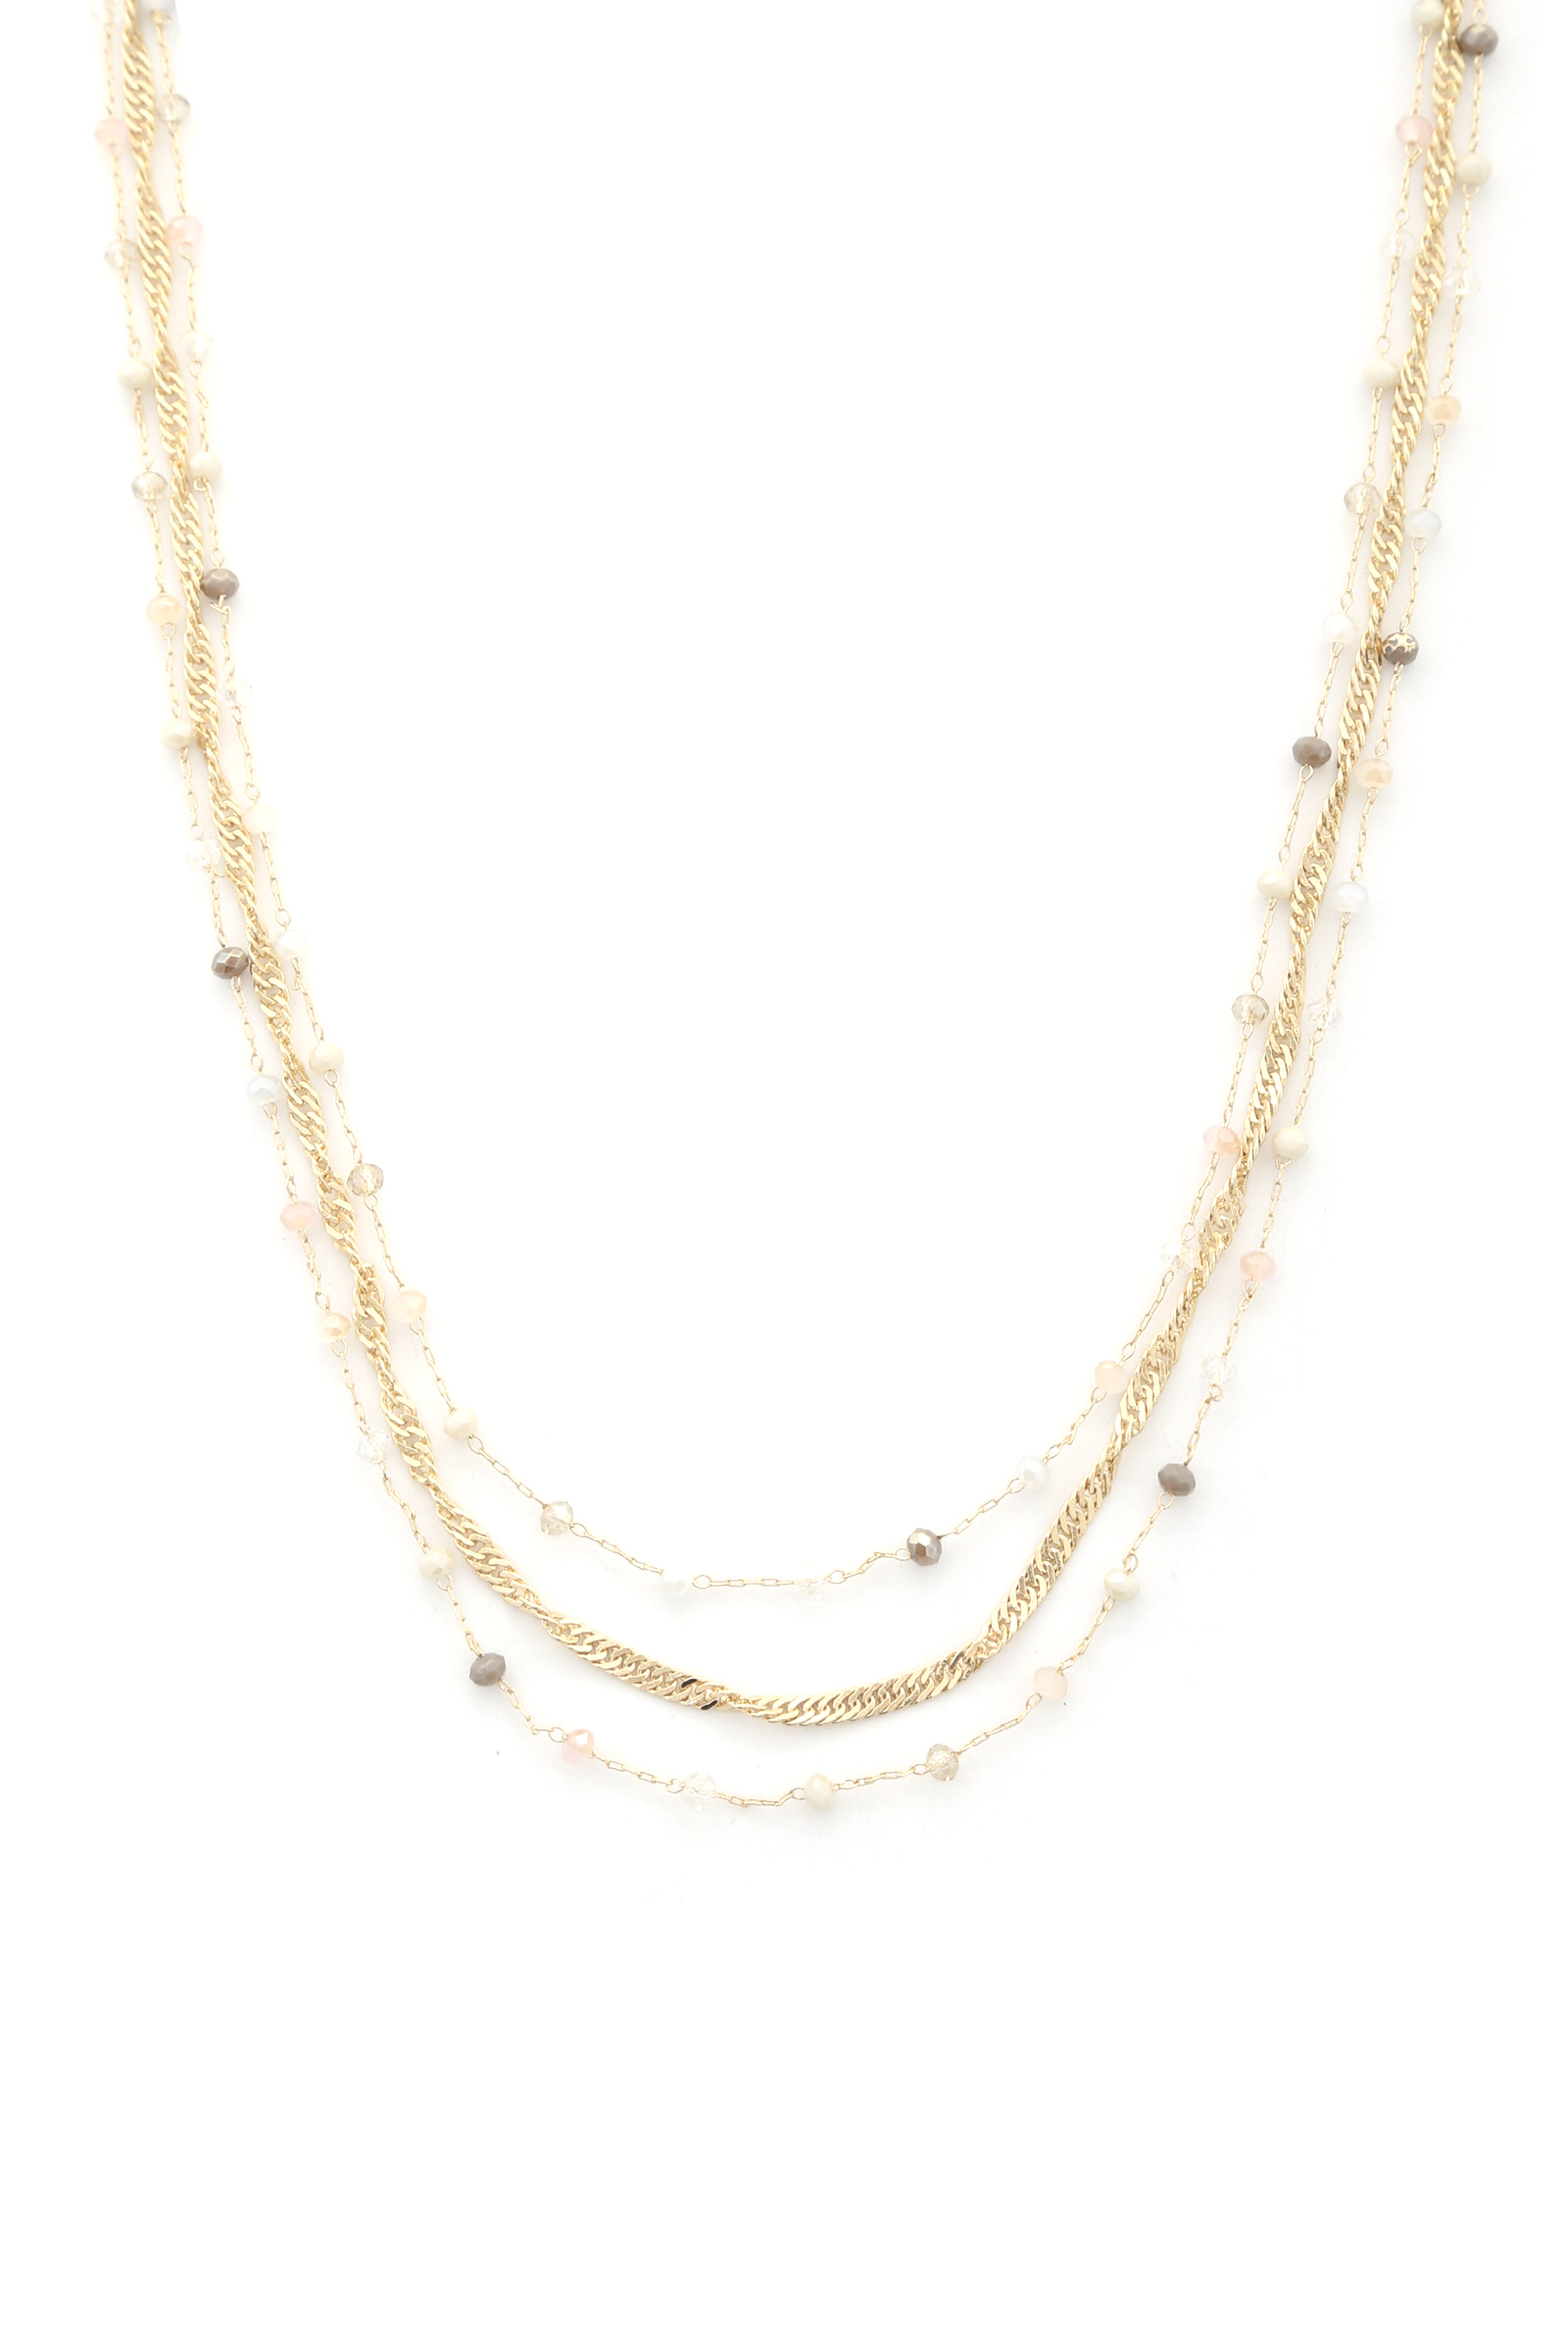 DAINTY BEAD LAYERED NECKLACE